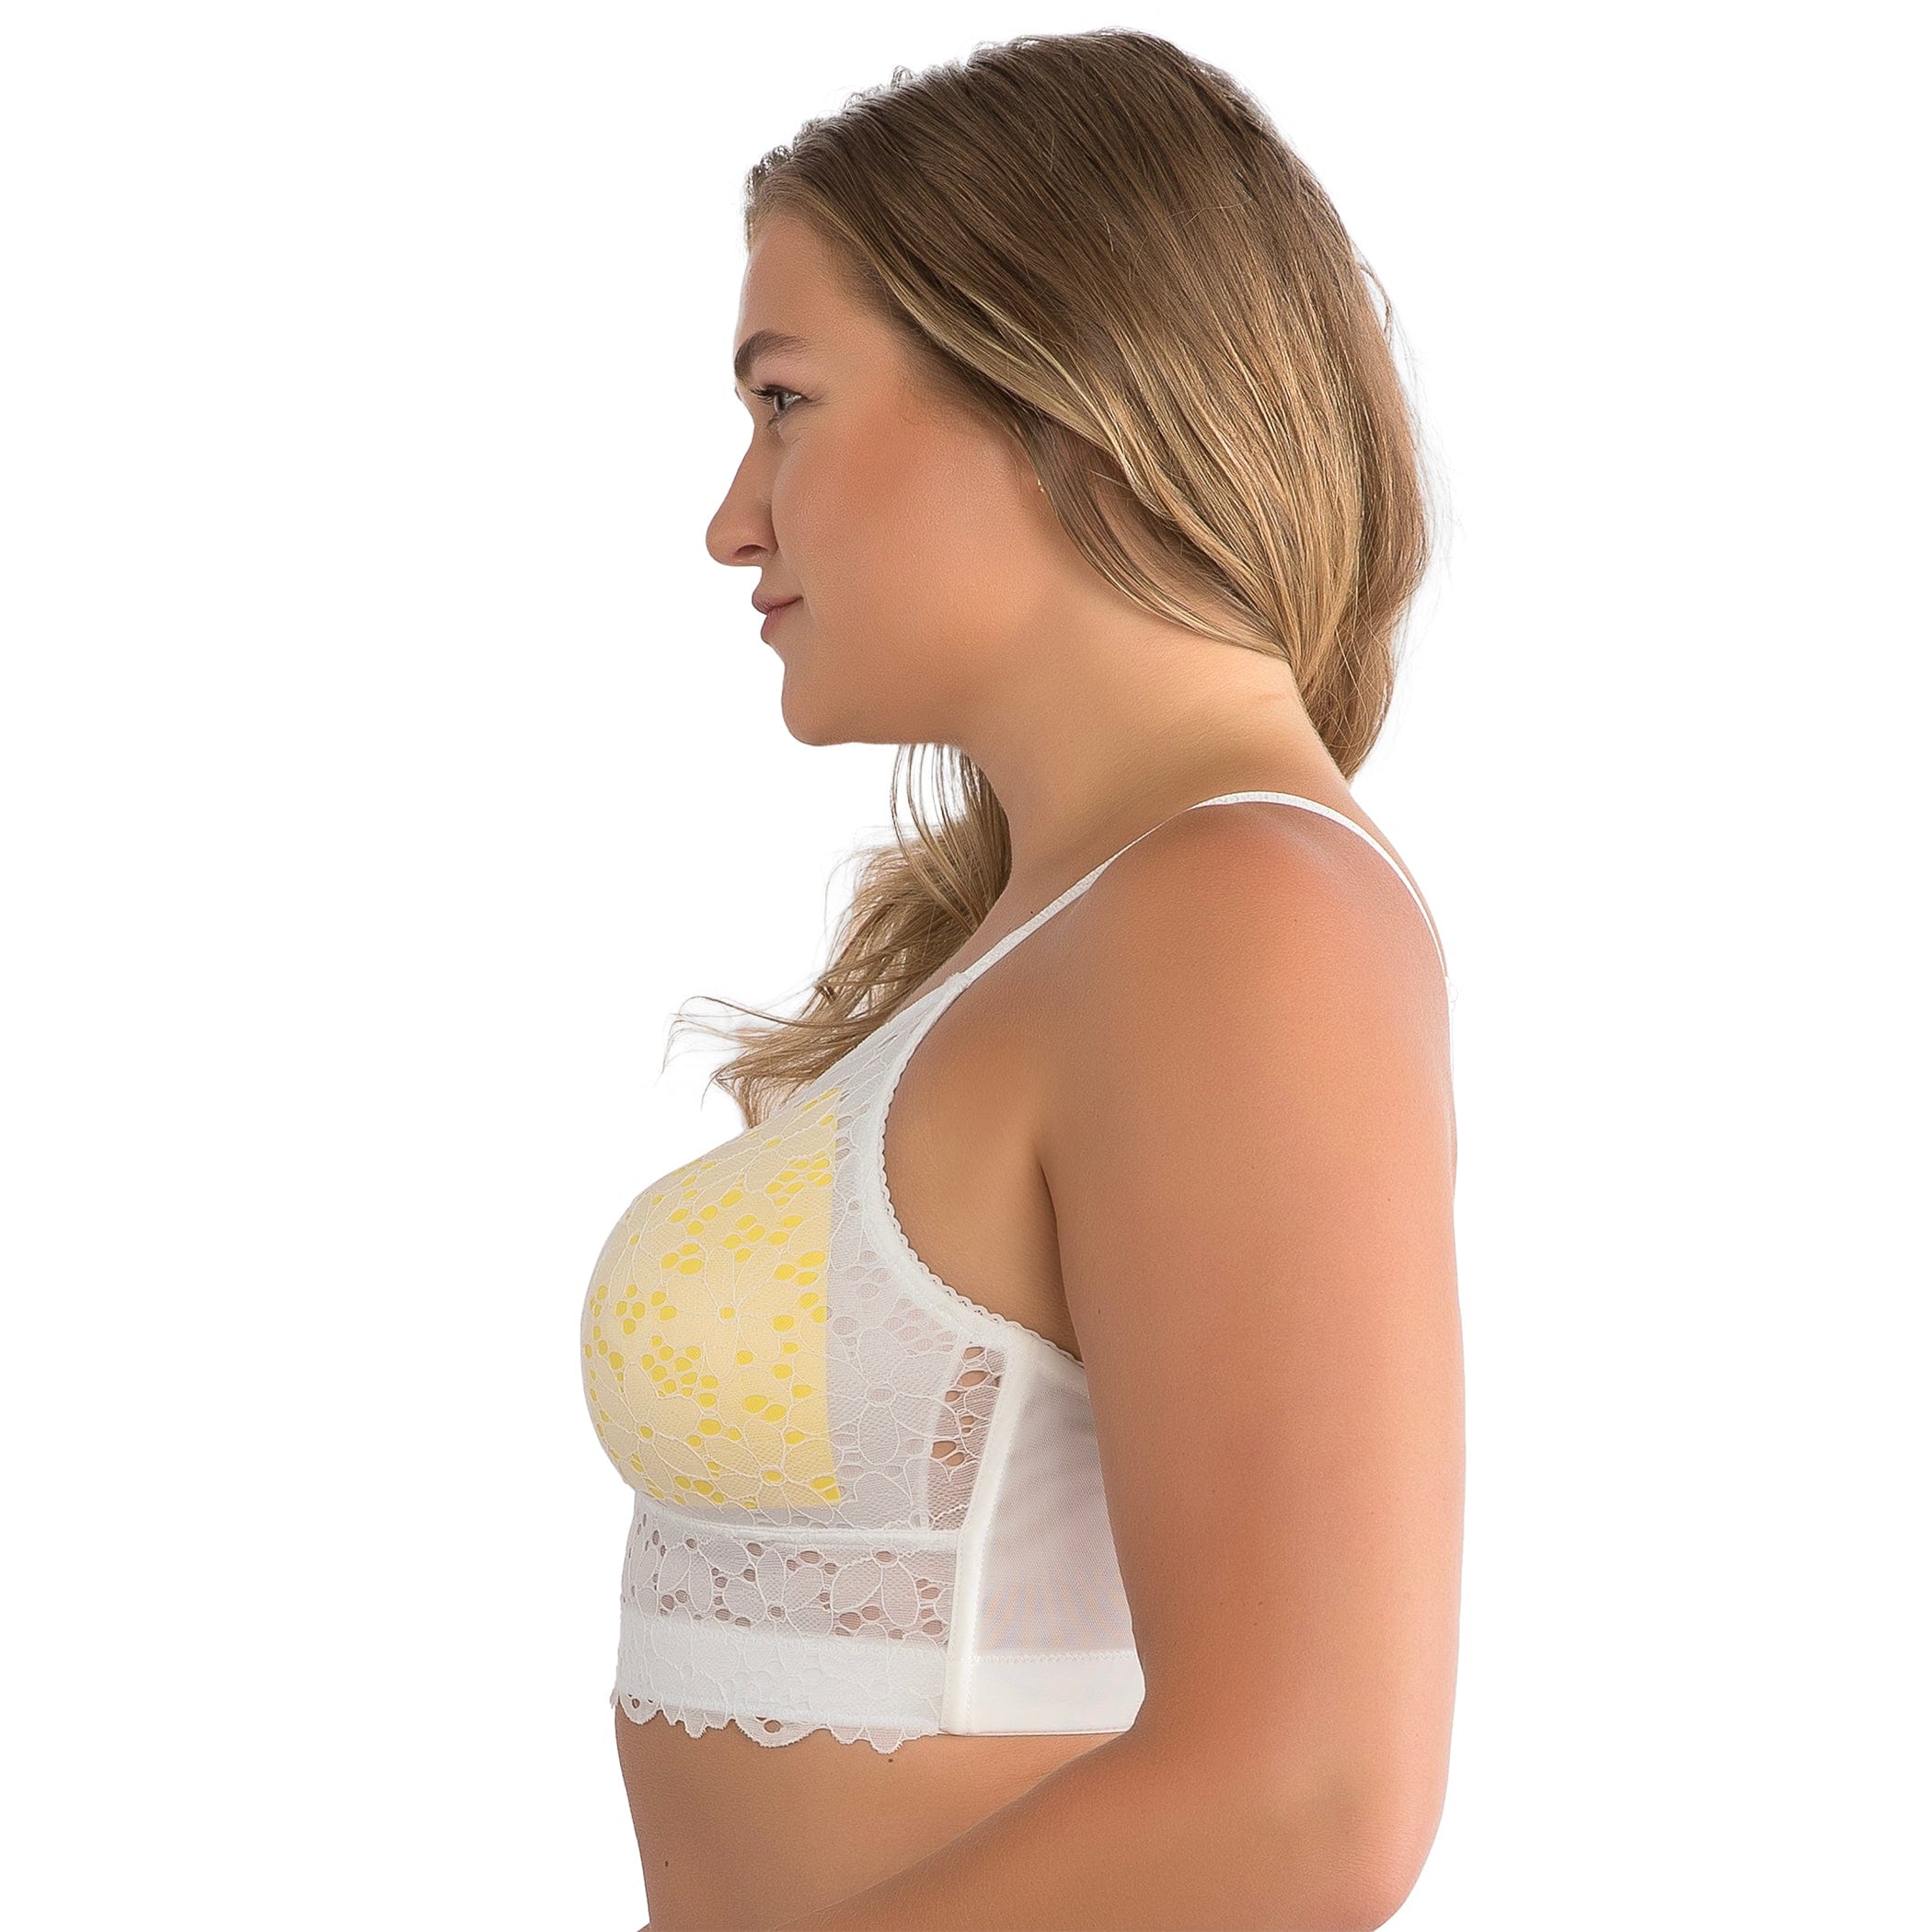 Cover Me in Daisies Lace Bra Top